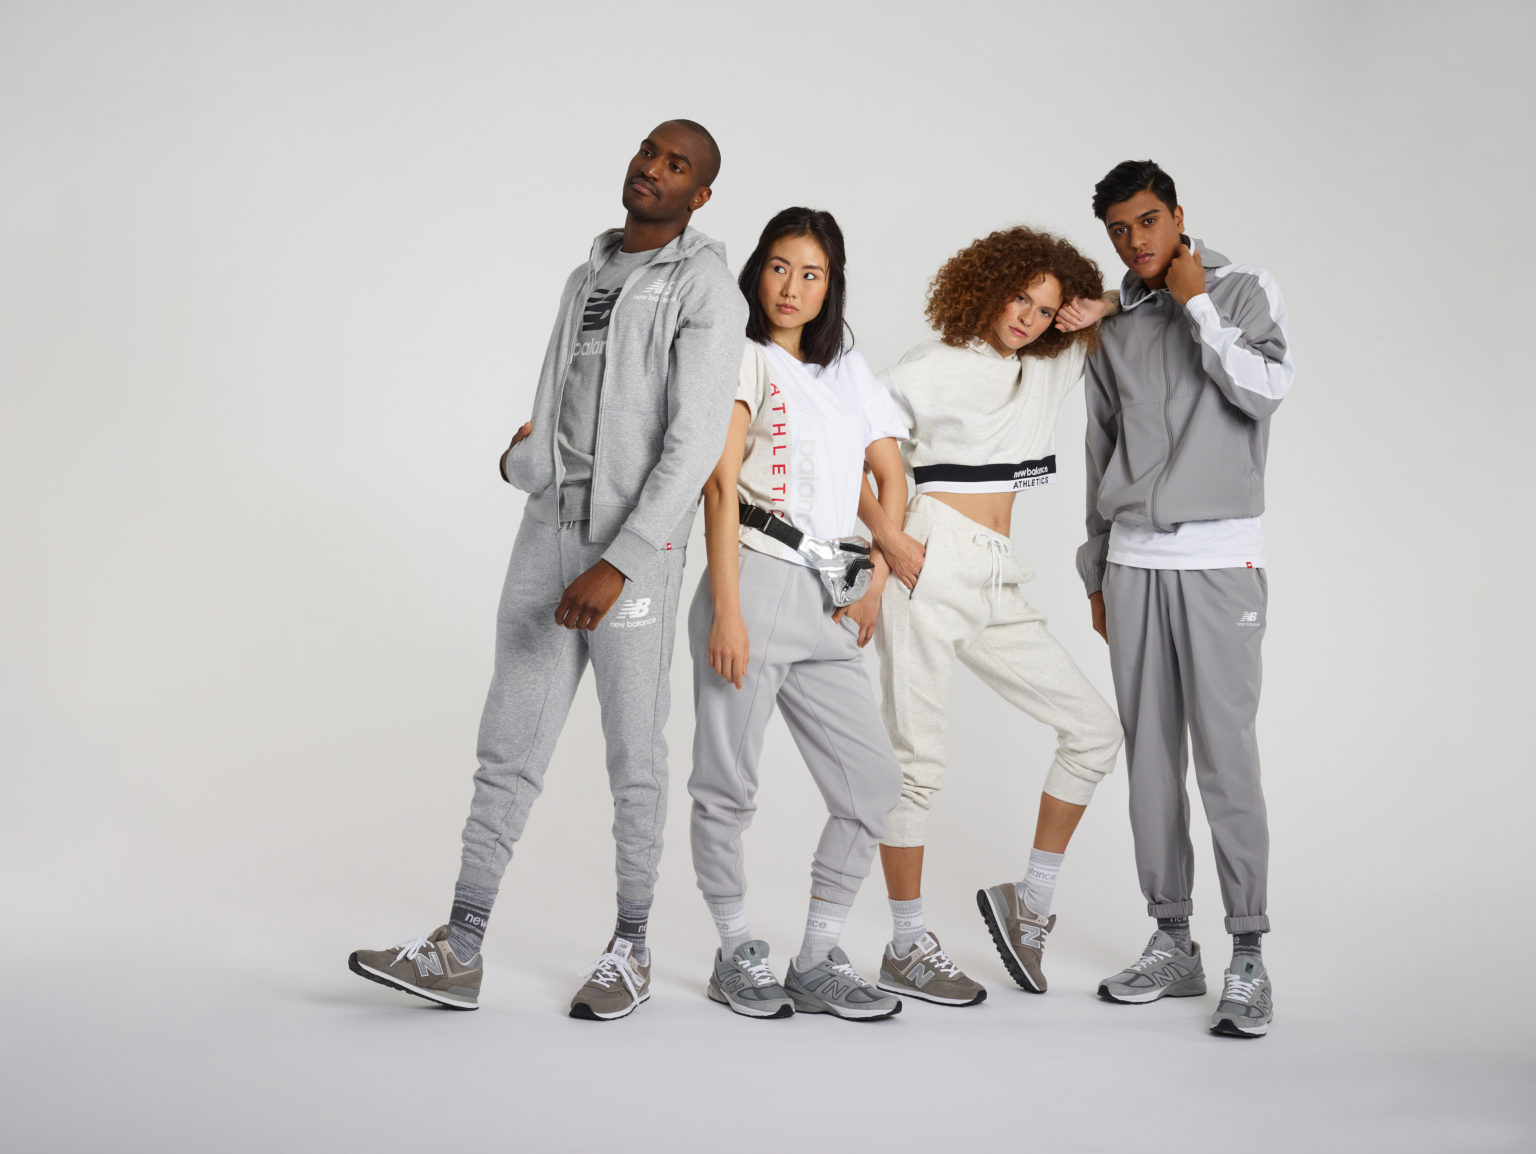 New Balance appoints Mango Communications as PR agency of record